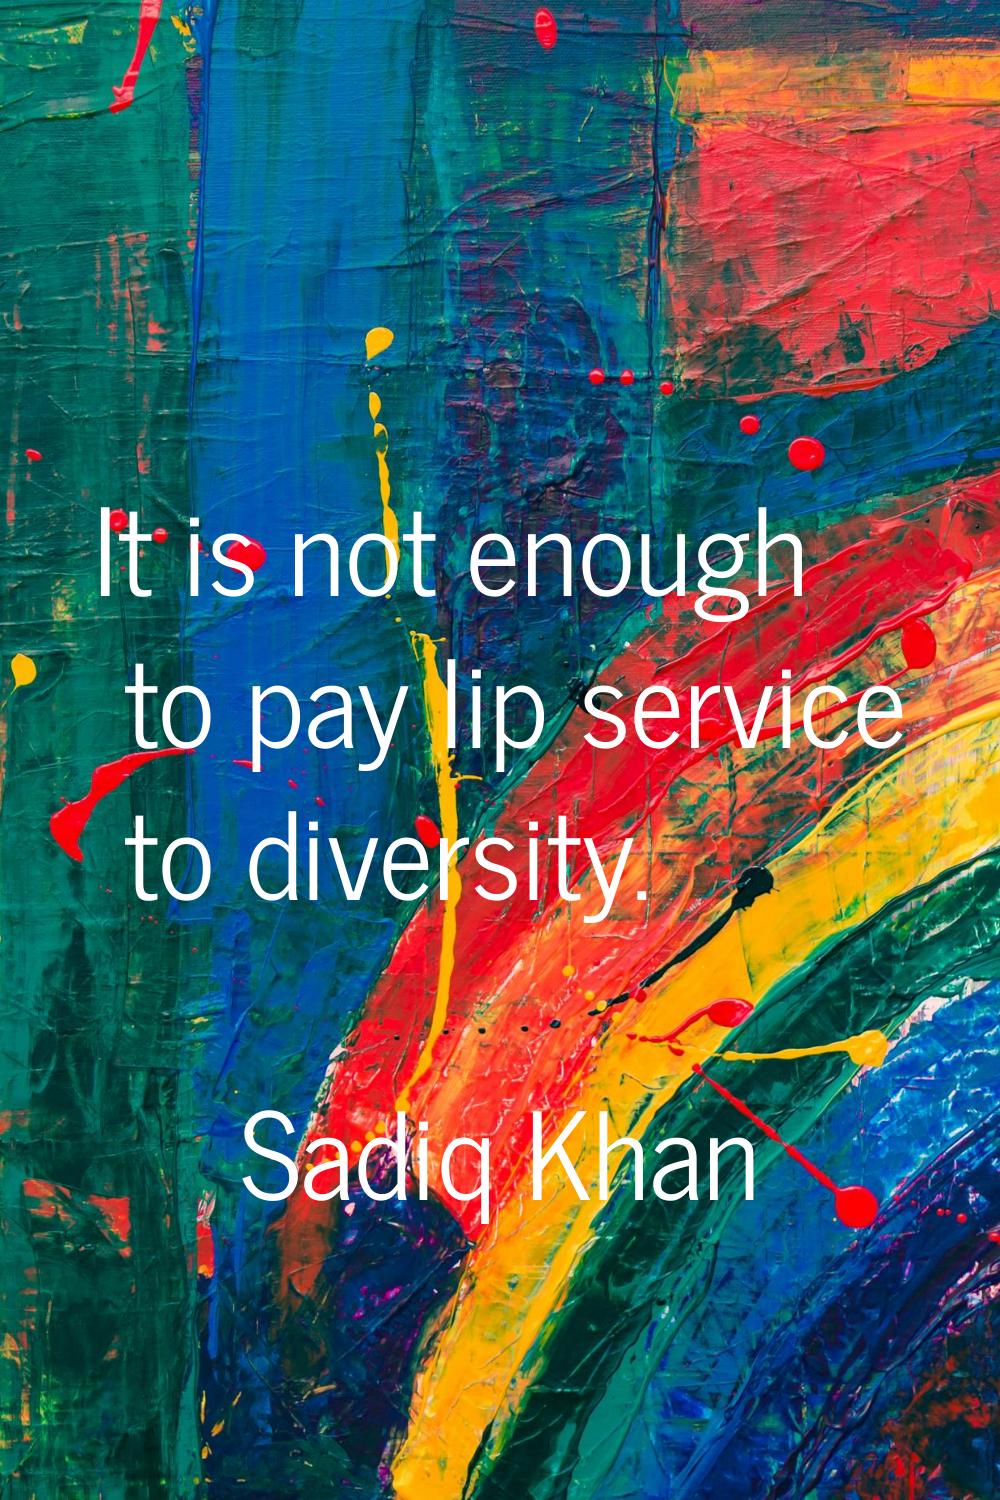 It is not enough to pay lip service to diversity.